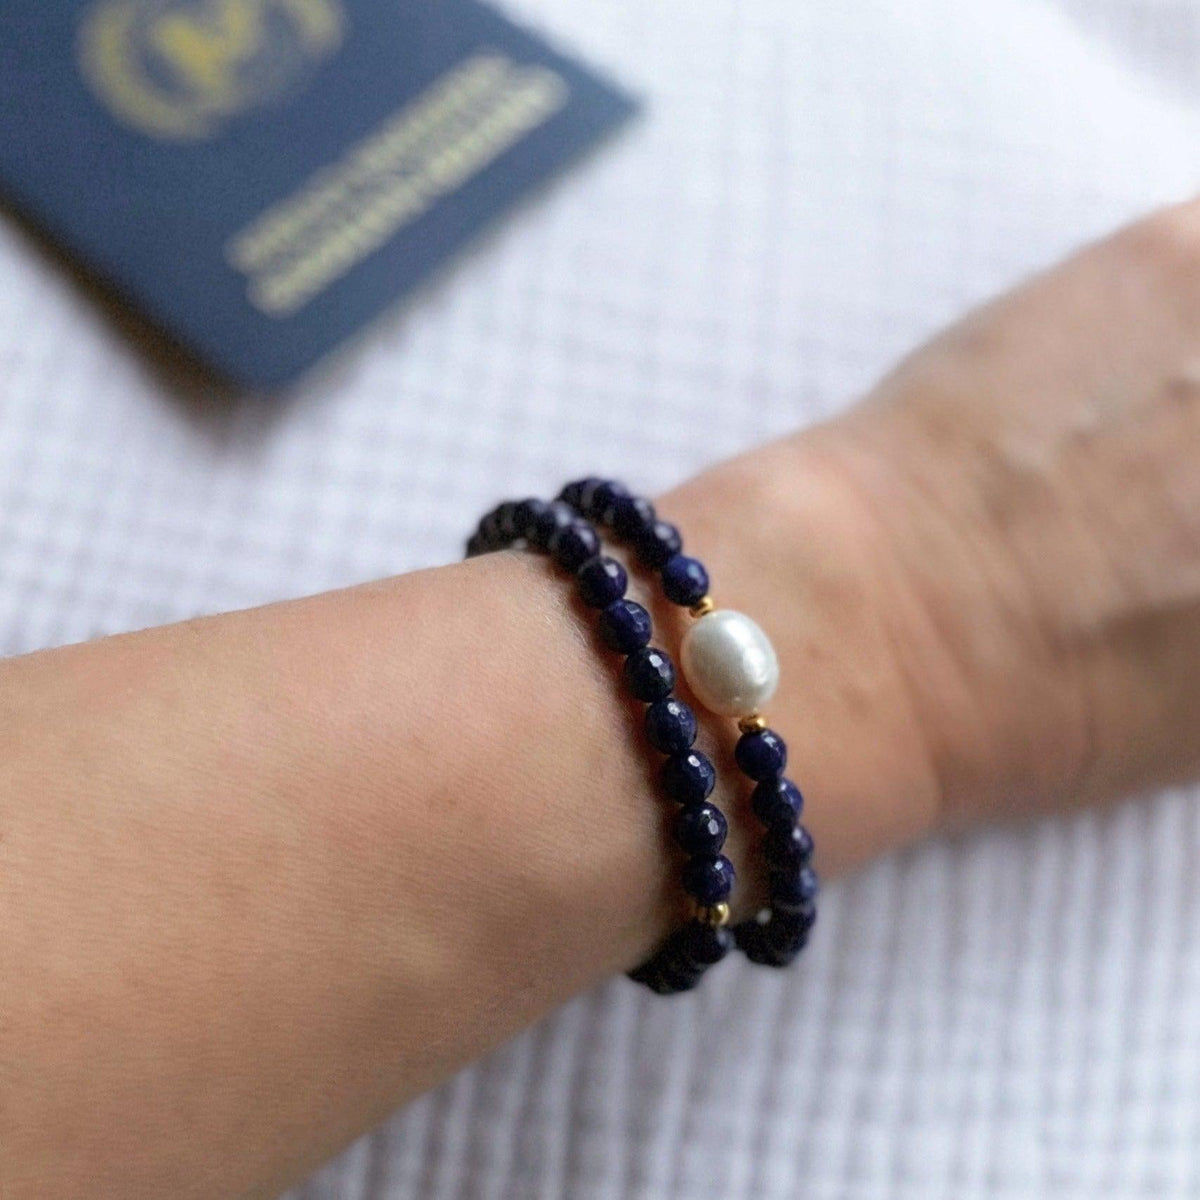 Charity Bracelet in Support of Humanitarian Aid to Ukraine - Peace Bracelet